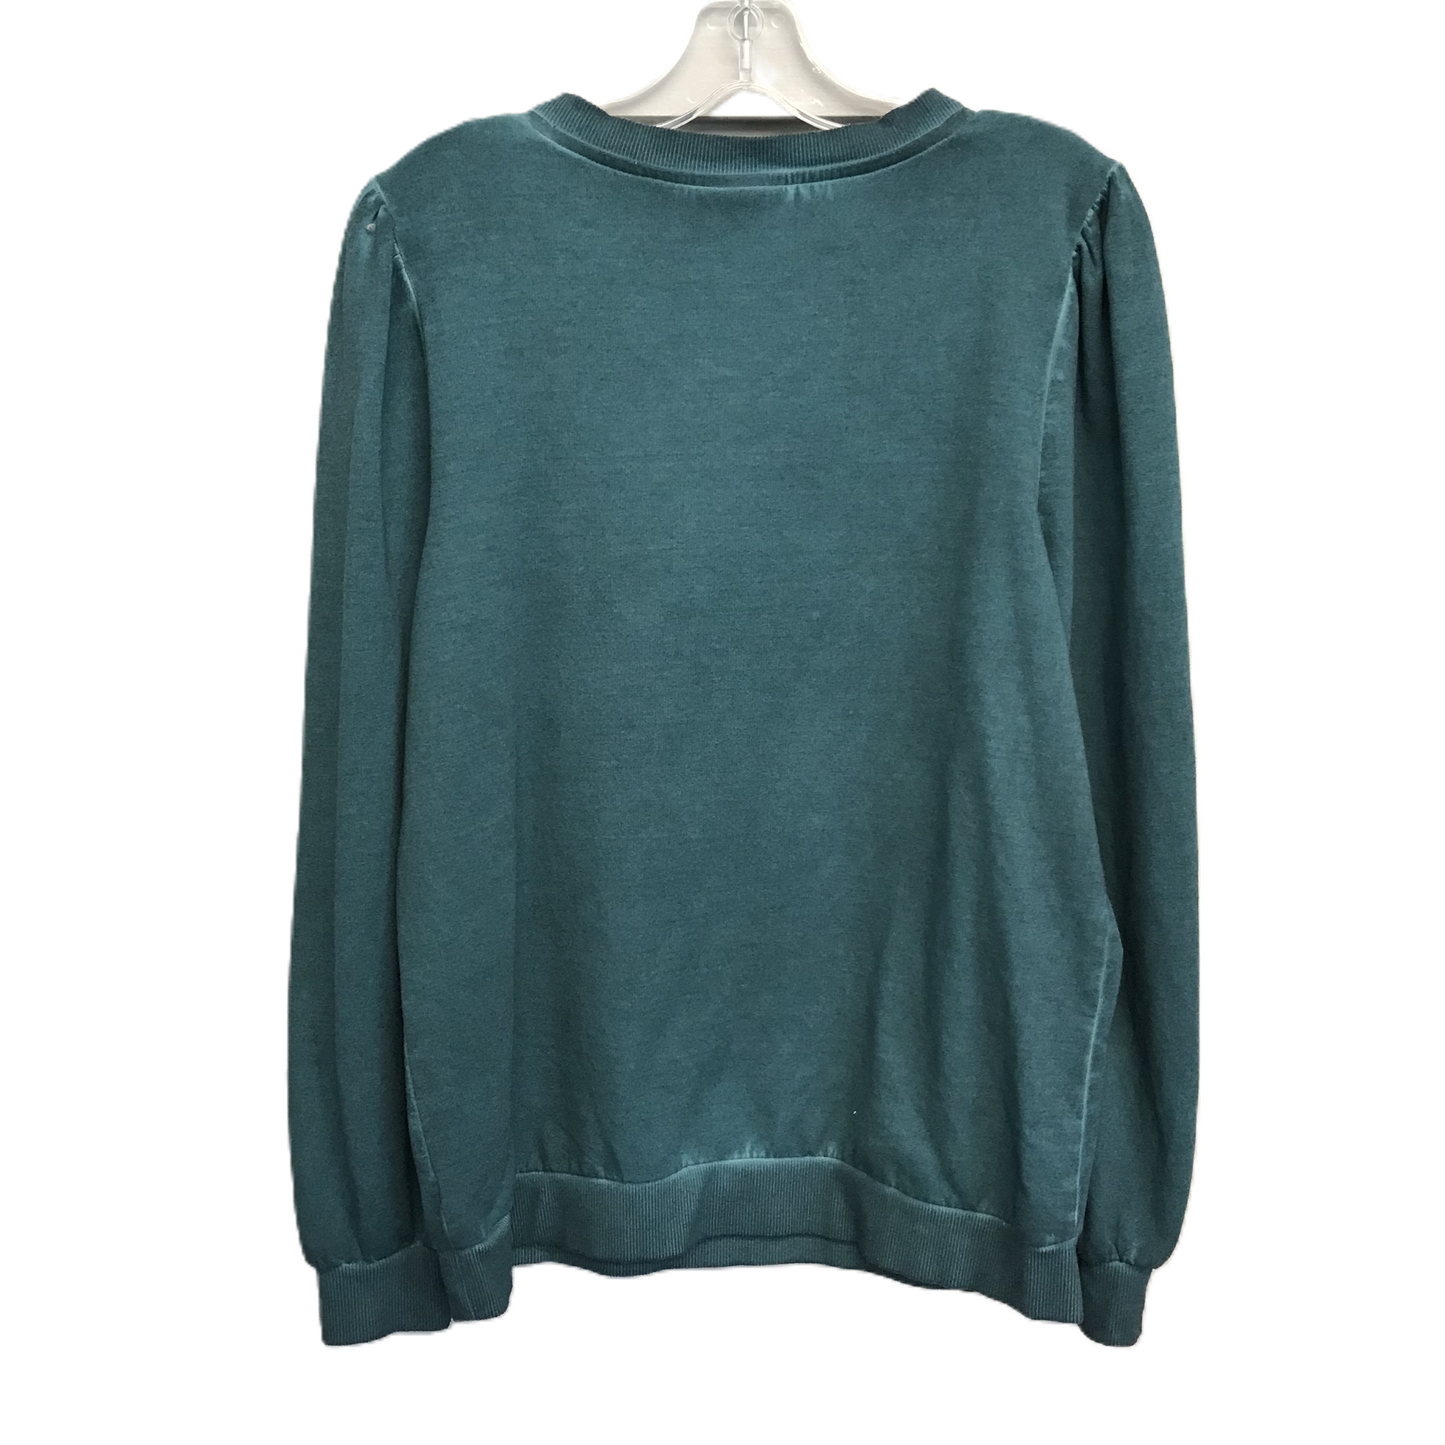 Teal Top Long Sleeve By Knox Rose, Size: M